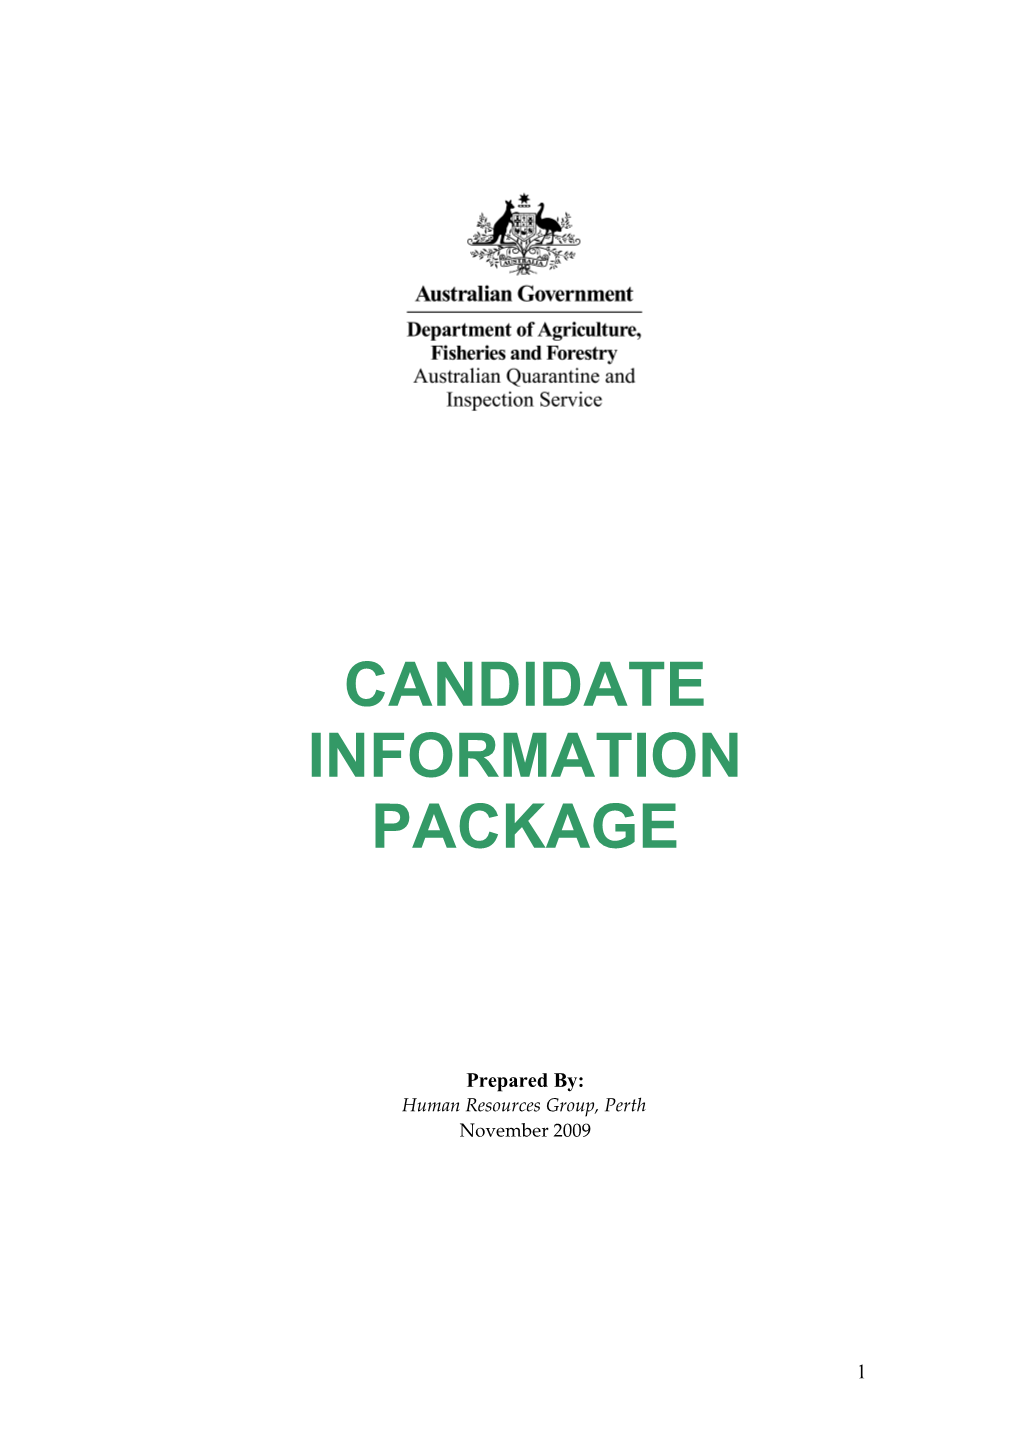 Candidate Information Package